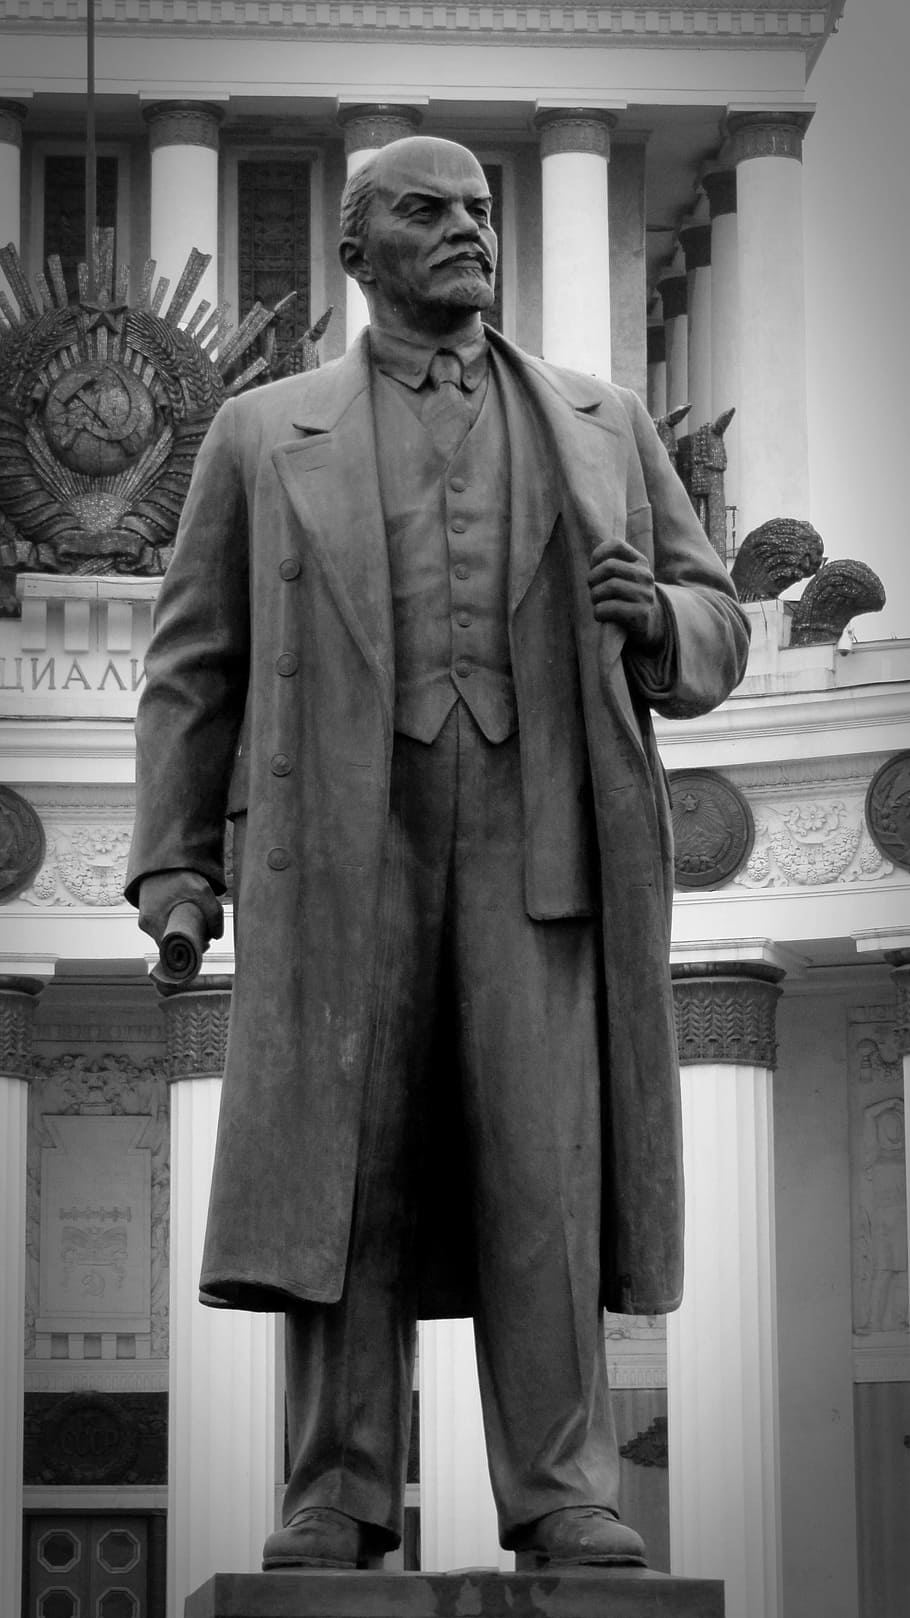 moscow, lenin, historically, soviet union, statue, monument, standing, architecture, one person, sculpture